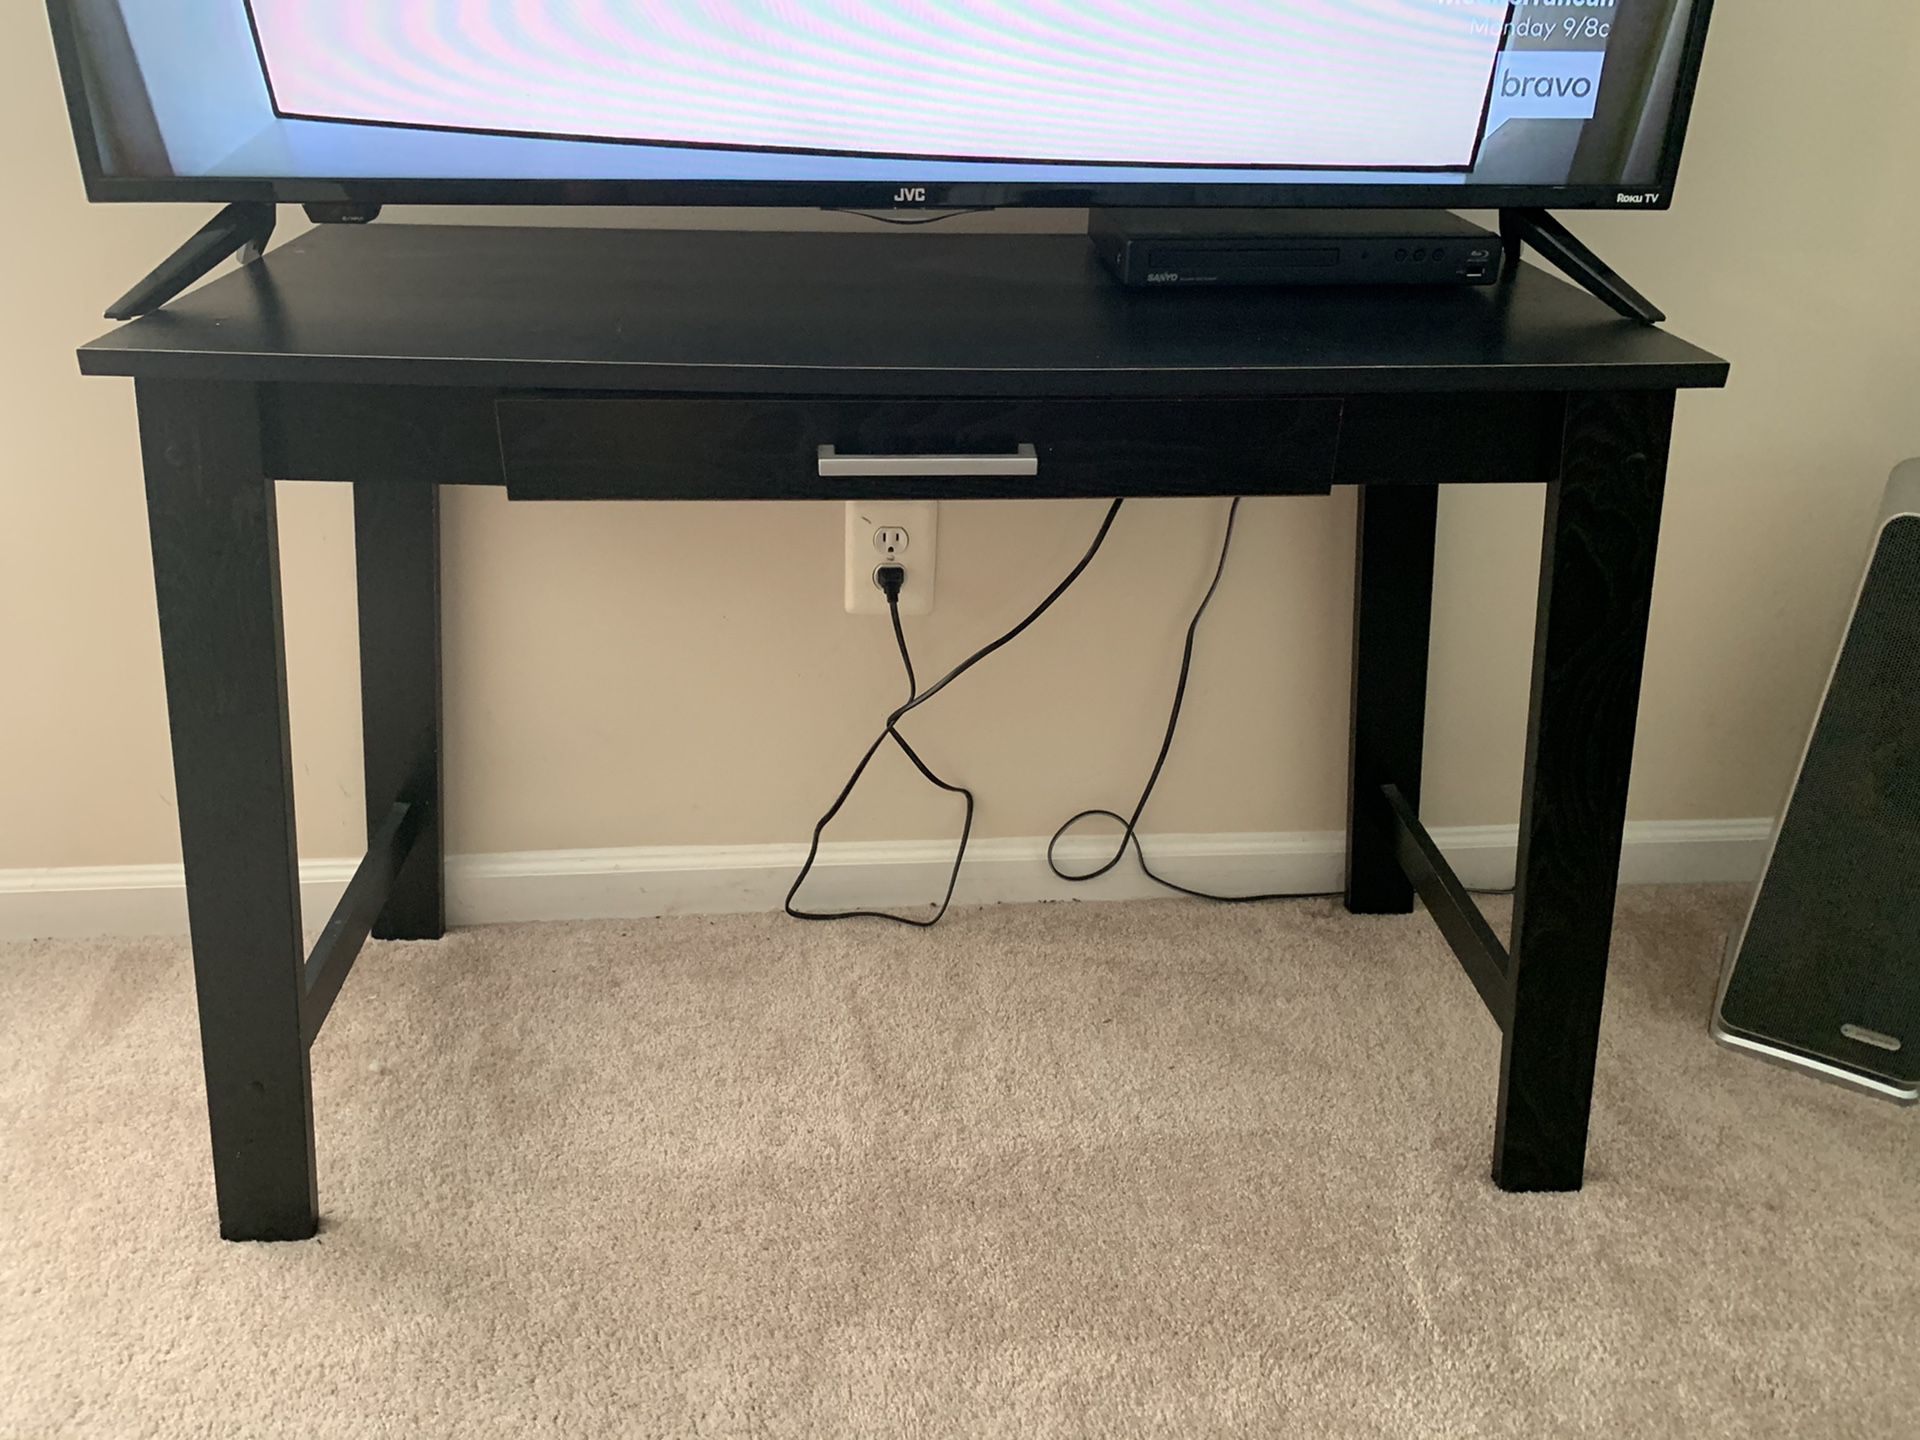 Desk/TV stand/entry way table/console table $20